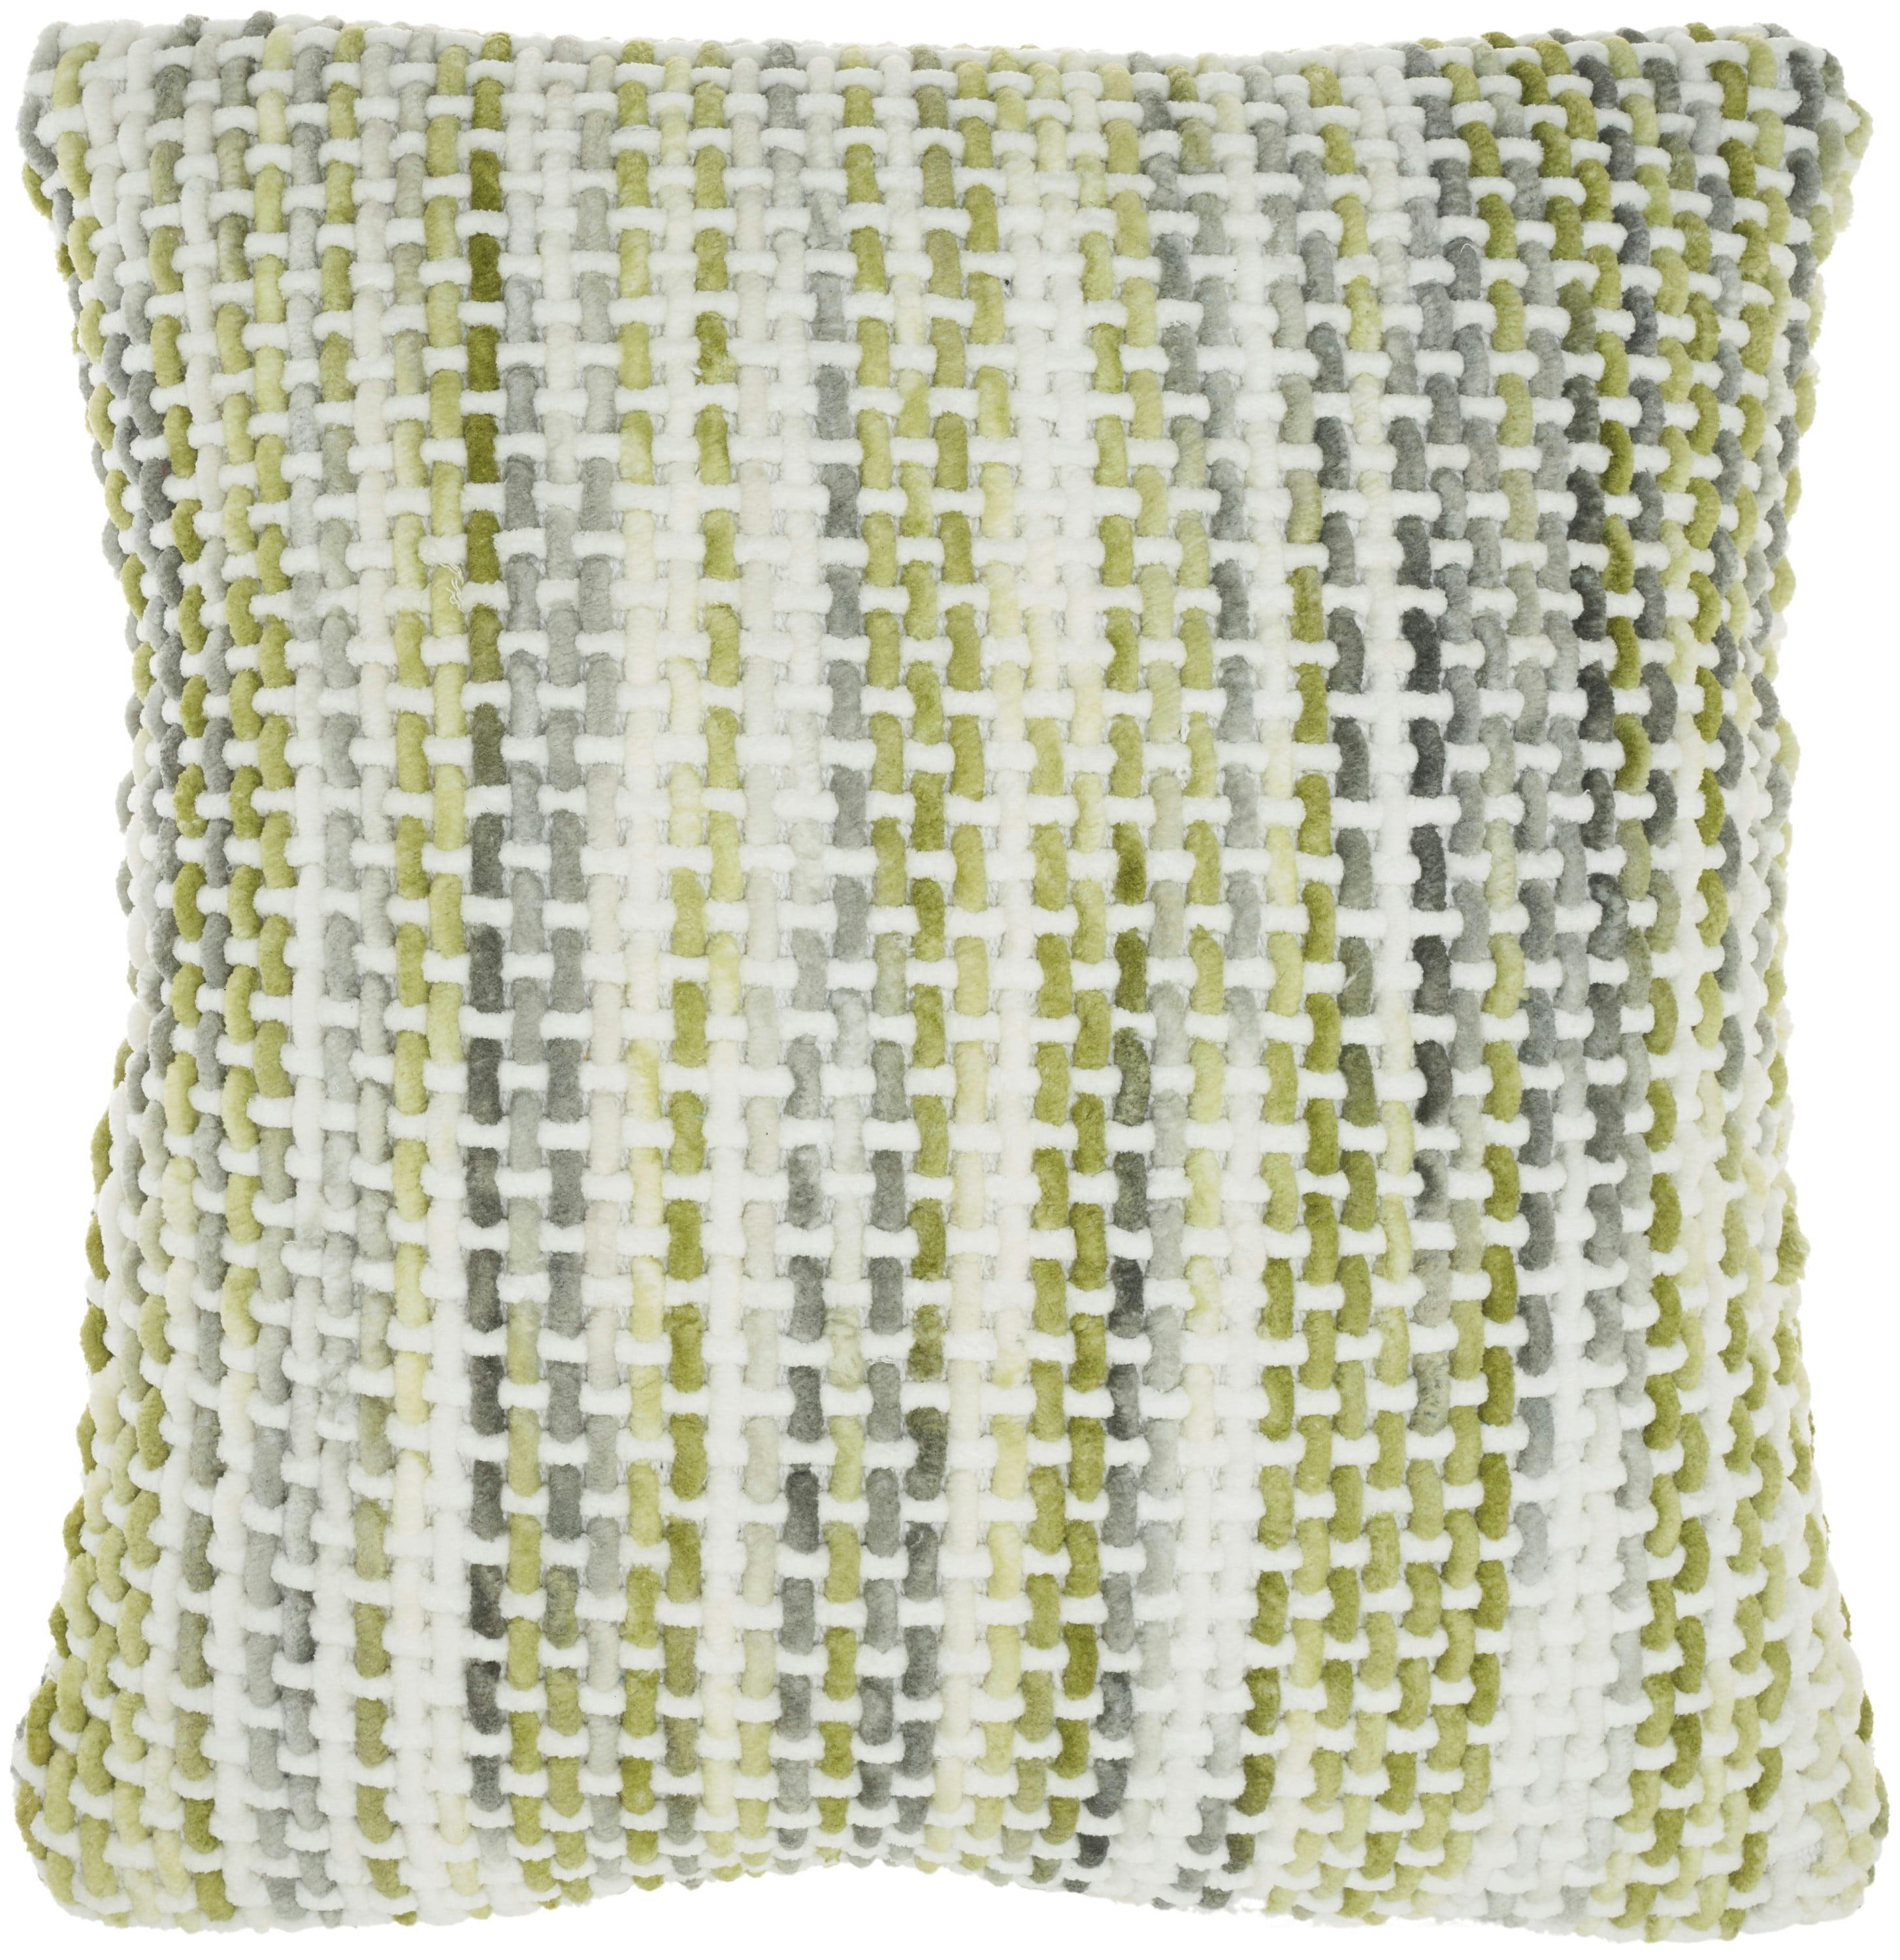 Soft Ombre Space Dye 20" Square Green/Grey Jute Throw Pillow